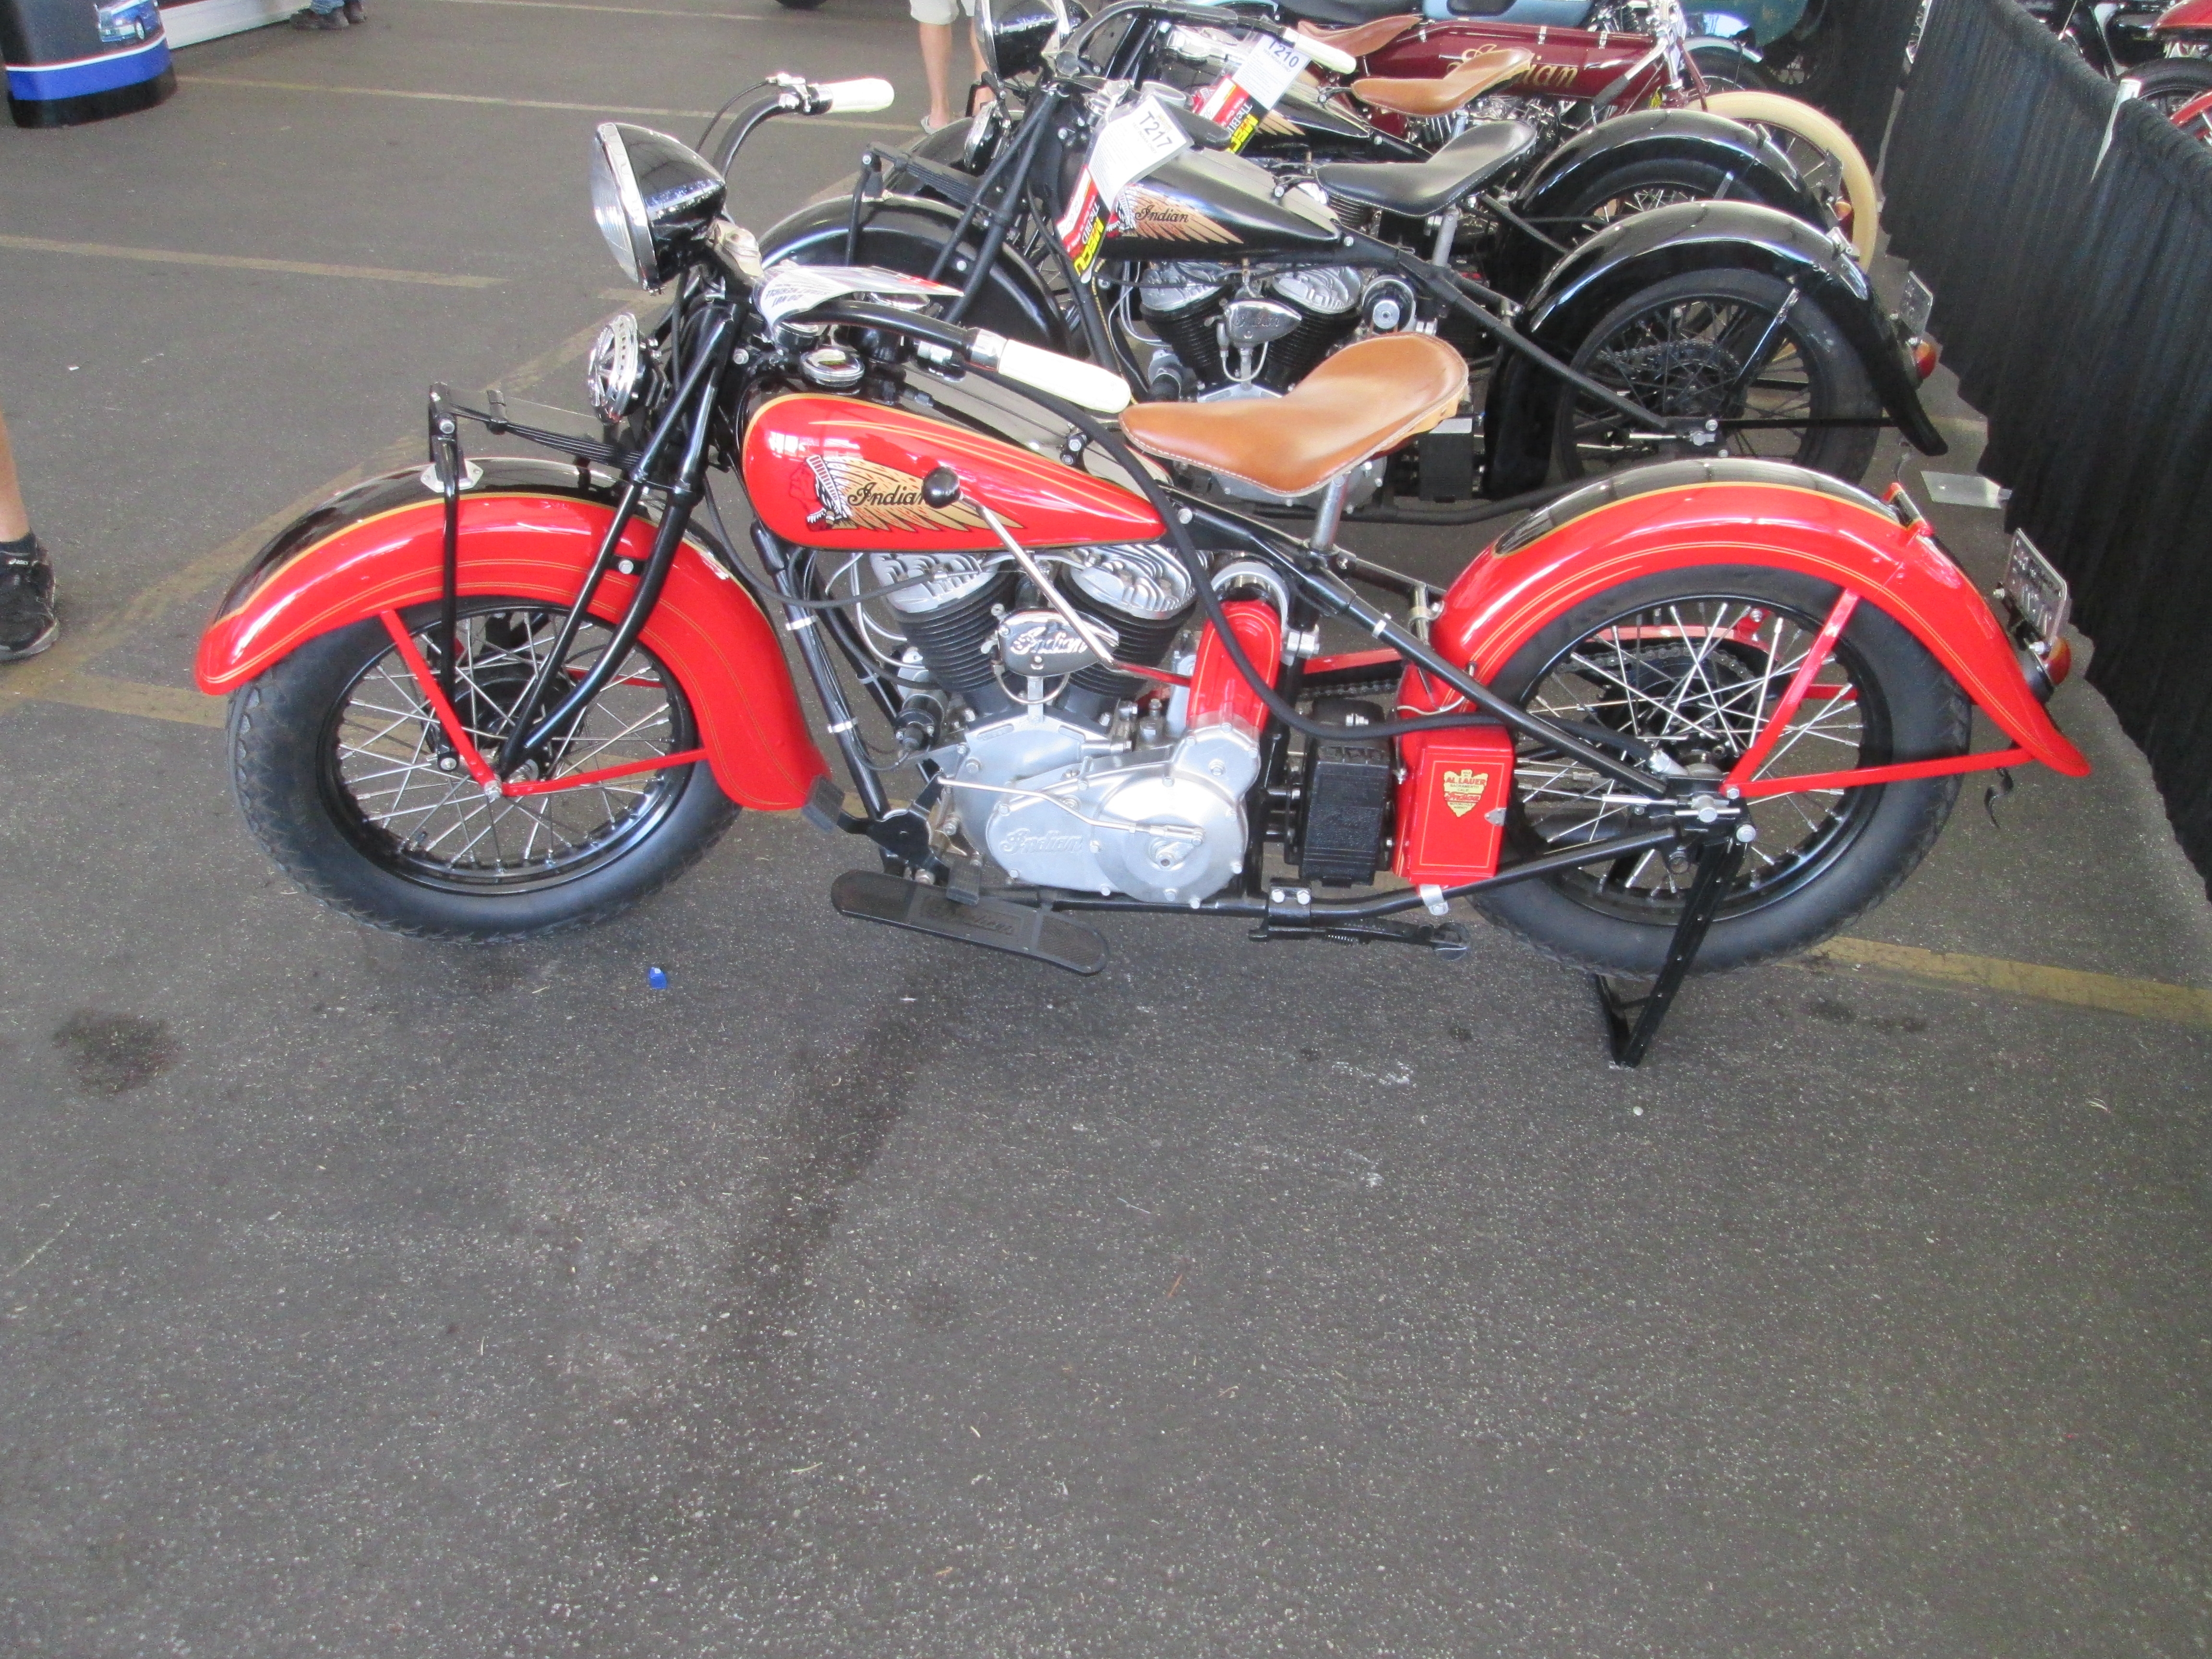 1929 Indian Chief